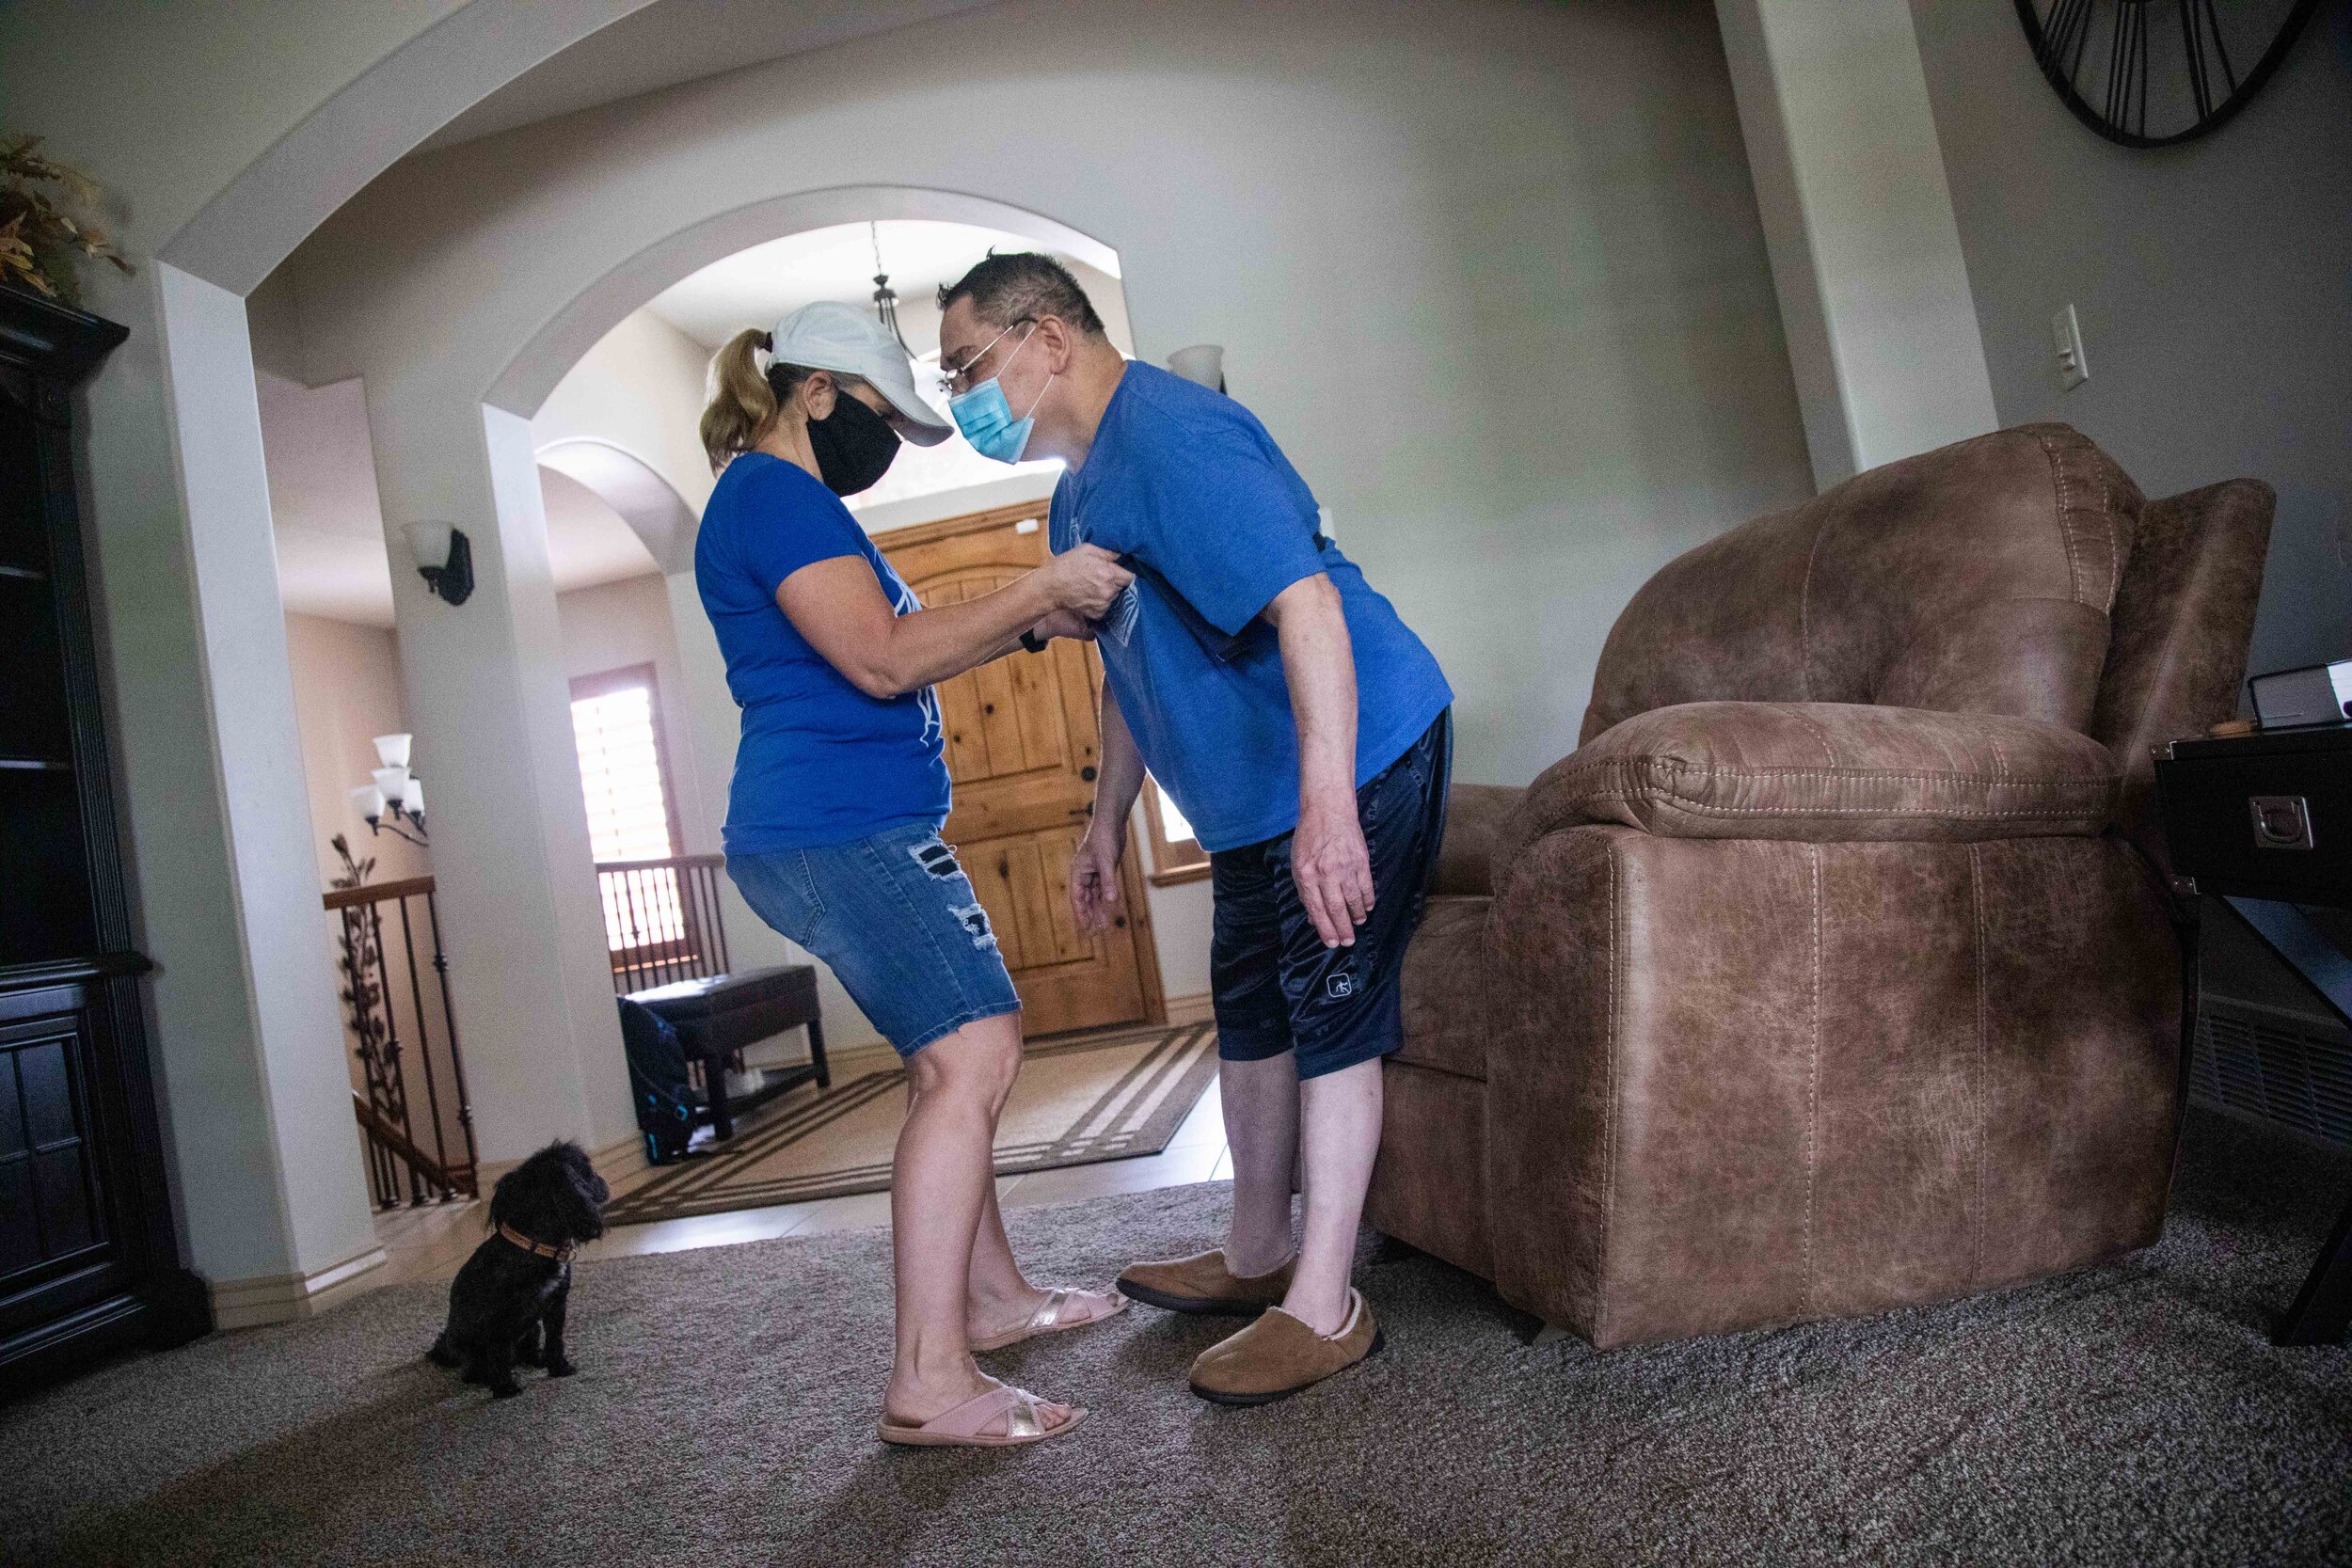  Denise Vigil-Thieldfoldt, left, helps her cousin Ron Vigil sit down in their home on Friday, May 22, 2020, in Syracuse, Utah. 